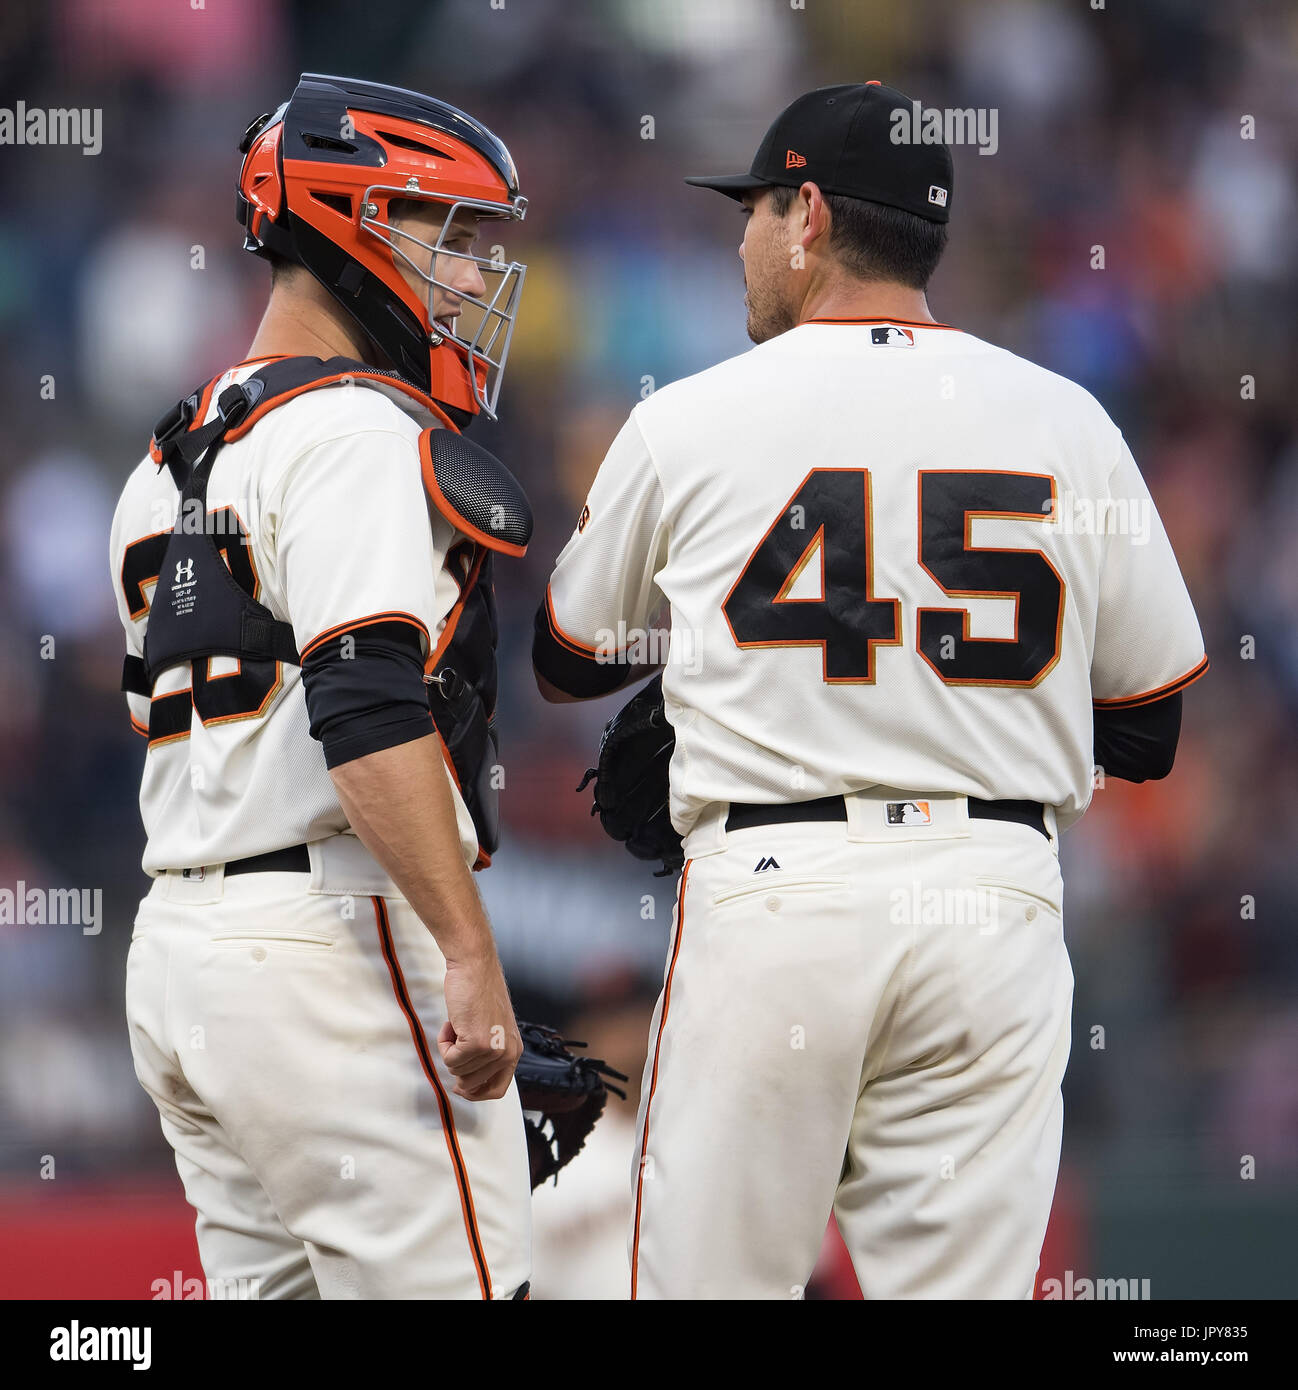 San Francisco, California, USA. 2nd August, 2017. San Francisco Giants catcher Buster Posey (28) goes to the mound to have a word with starting pitcher Matt Moore (45) in the second inning, during a MLB game between the Oakland Athletics and the San Francisco Giants at AT&T Park in San Francisco, California. Valerie Shoaps/CSM/Alamy Live News Stock Photo